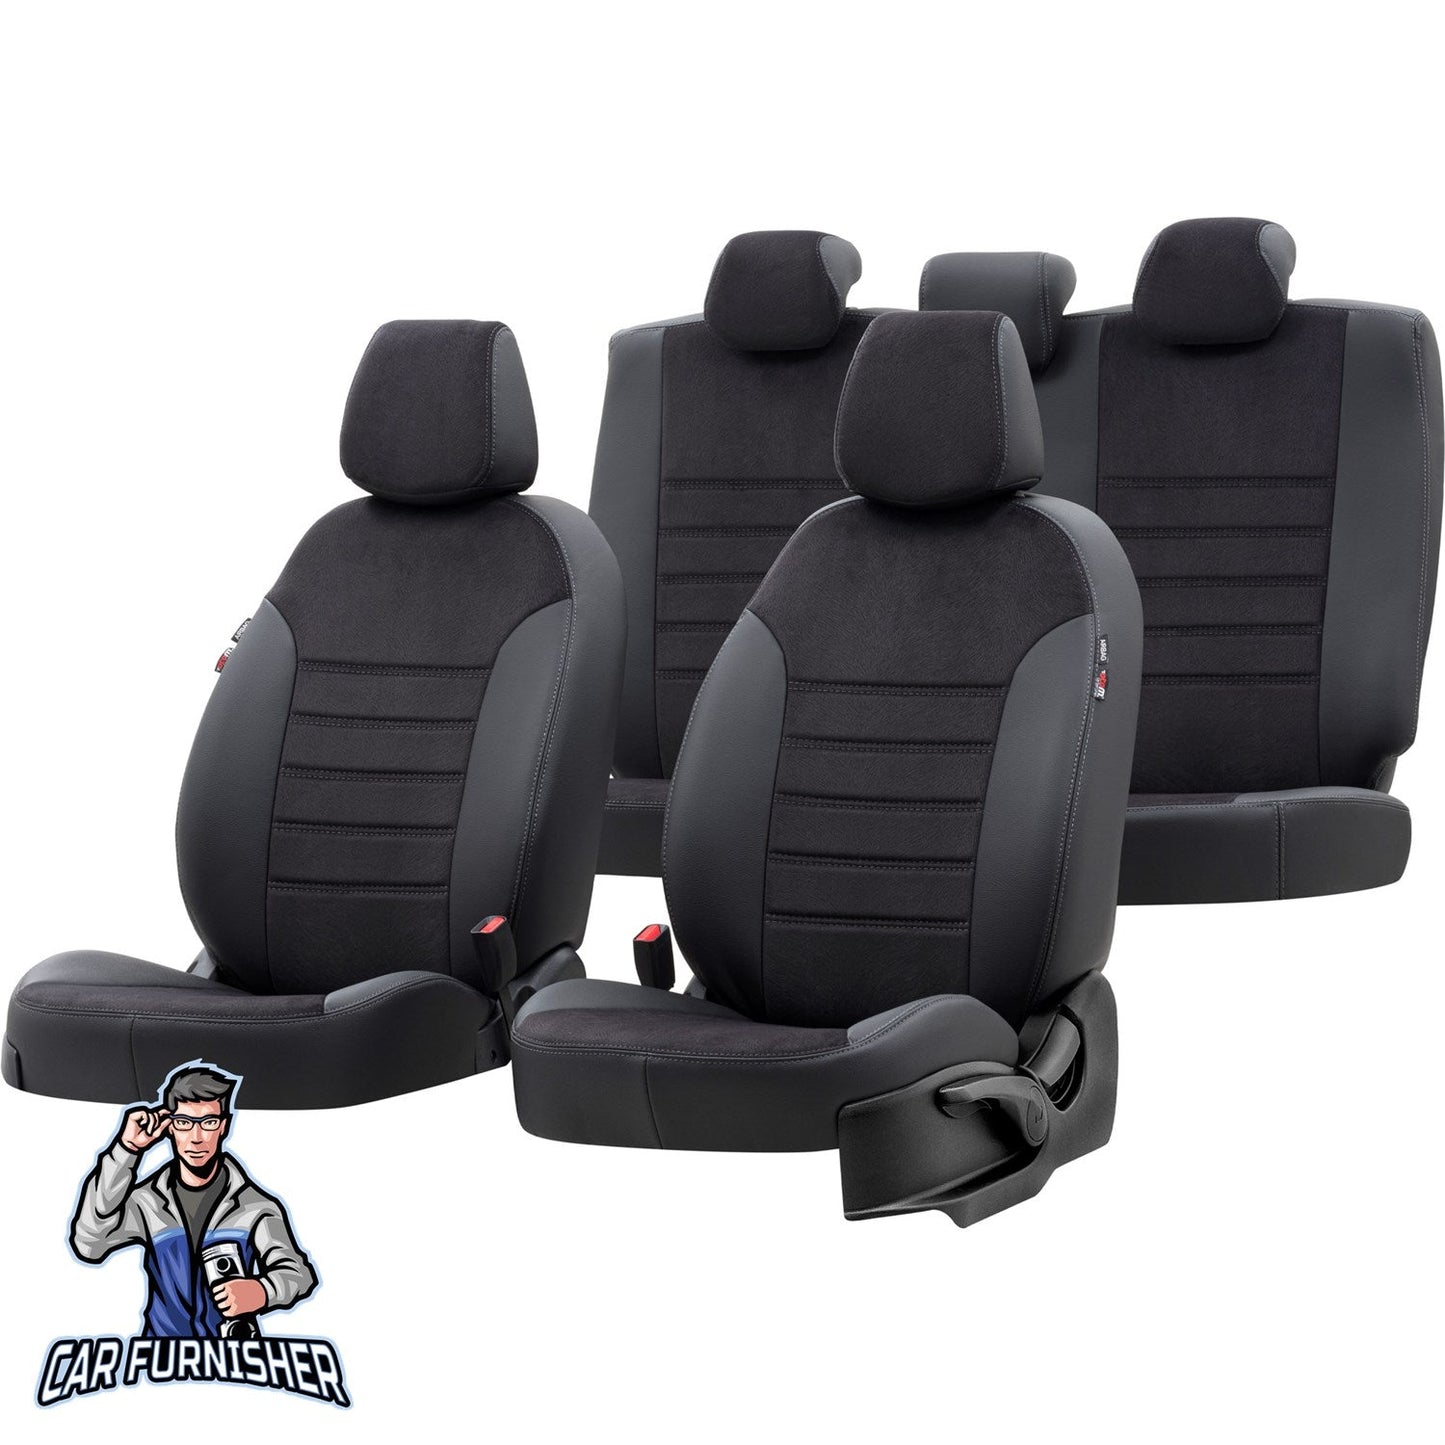 Landrover Freelander Car Seat Covers 1998-2012 London Design Black Leather & Foal Feather